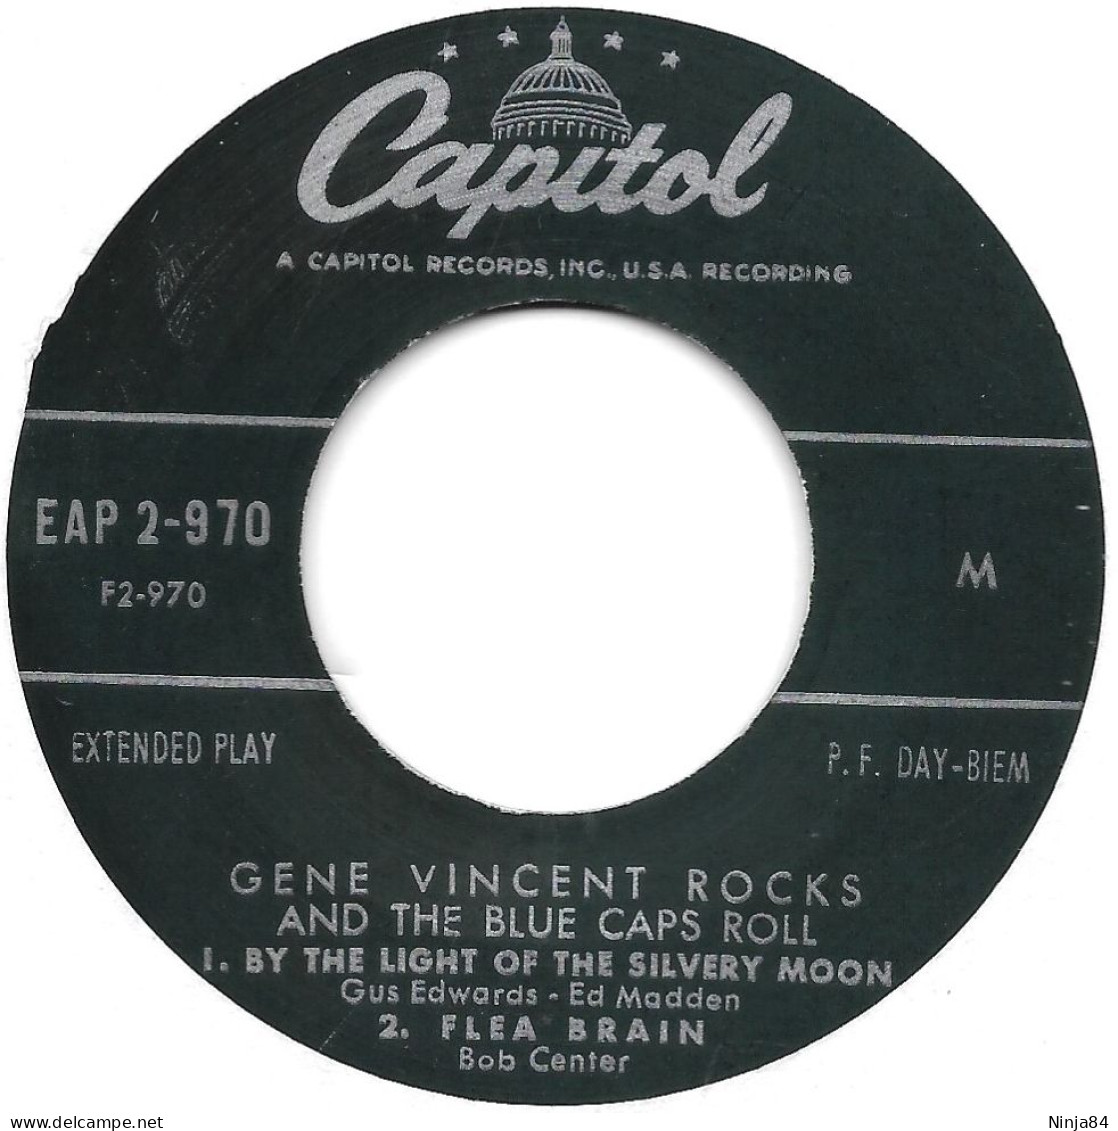 EP 45 RPM (7") Gene Vincent  "  By The Light Of The Silvery Moon  " - Rock